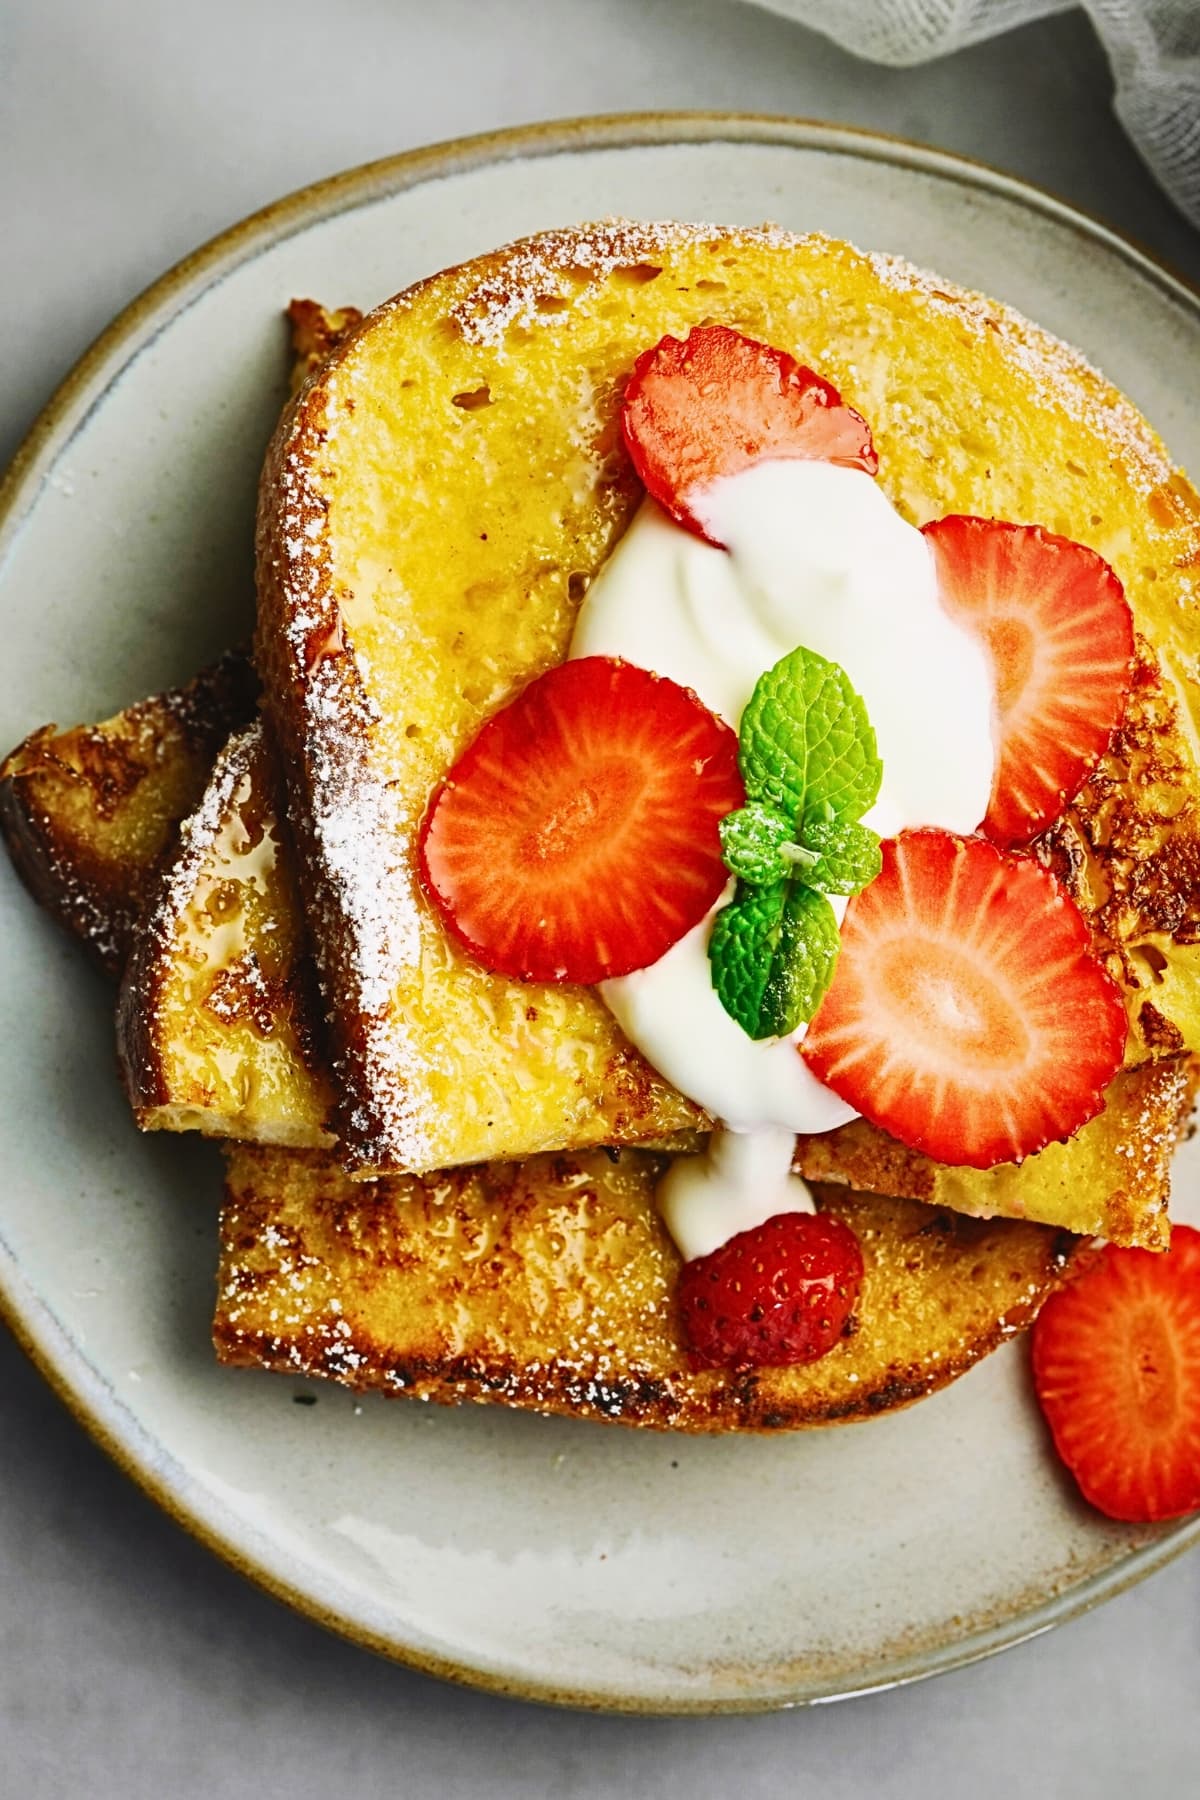 Sourdough French toast topped with sliced strawberries and whipped cream.